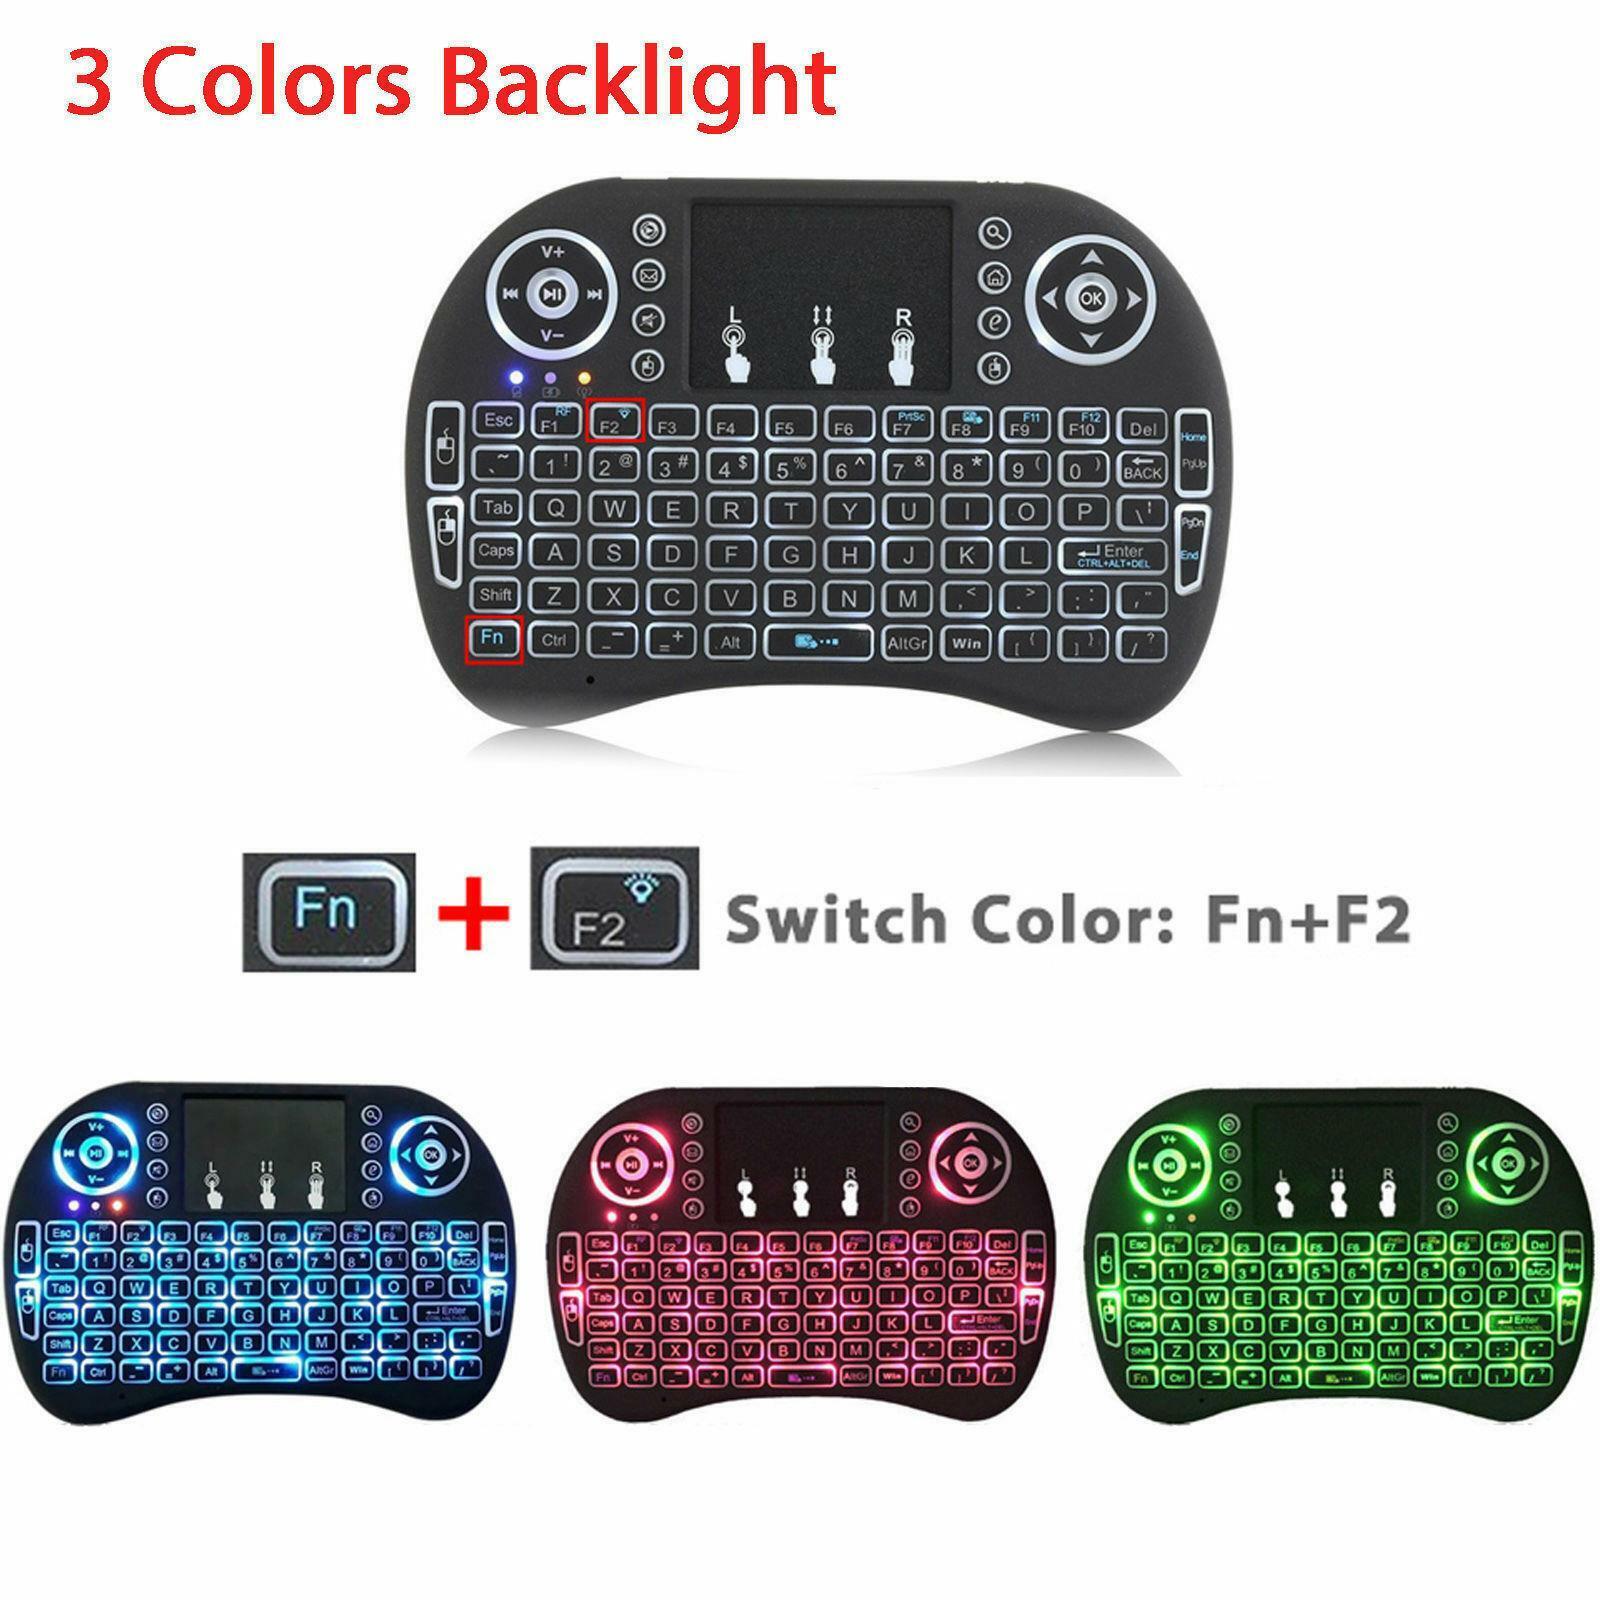 2.4G Backlit Wireless Keyboard Touchpad Rechargeable for Smart TV Android PC